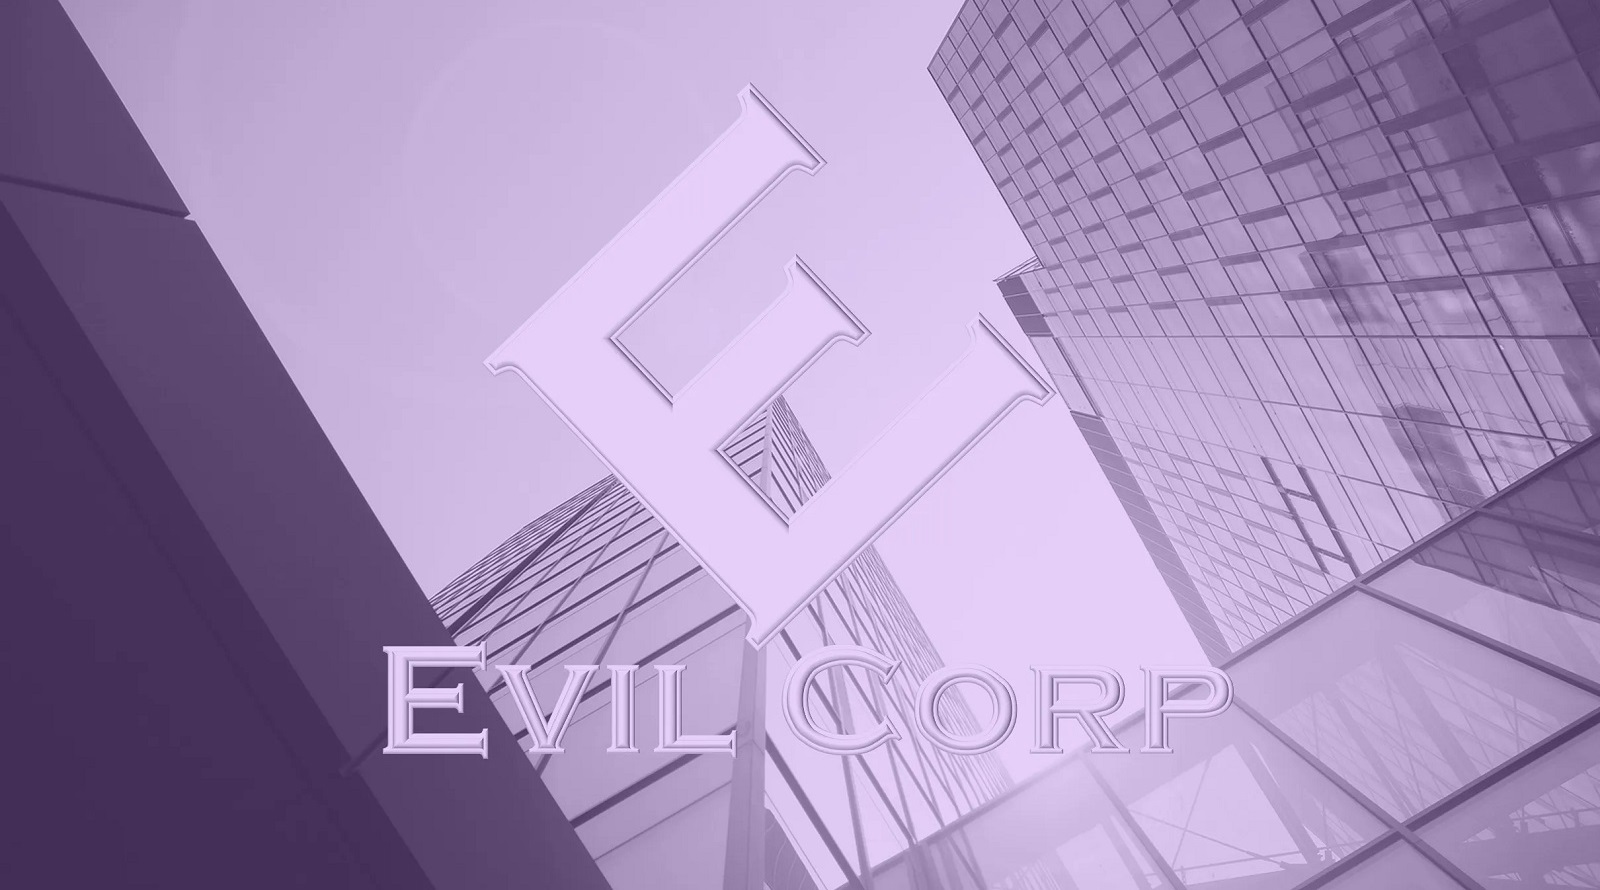 Evil Corp switched to LockBit